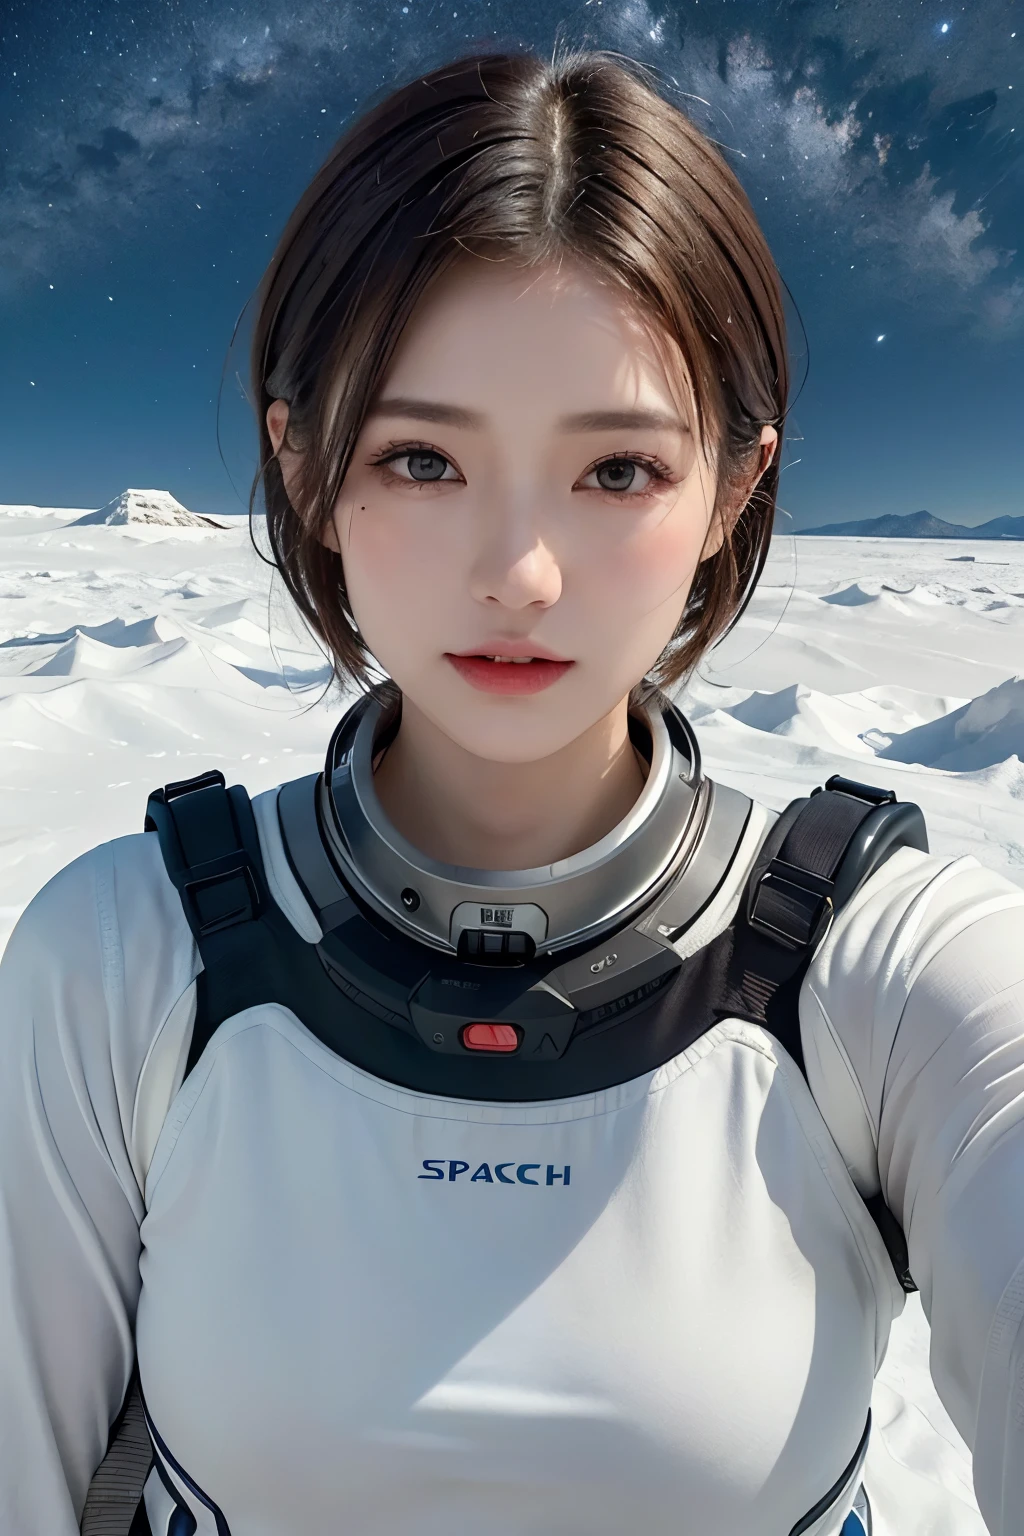 top-quality、​masterpiece、超A high resolution、(realisitic:1.4)、Beautuful Women１、Beautiful detail eyes and skin、ssmile、Light brown short-cut hair、The perfect spacesuit、spaceships、cloudy ash sky、Snow World、